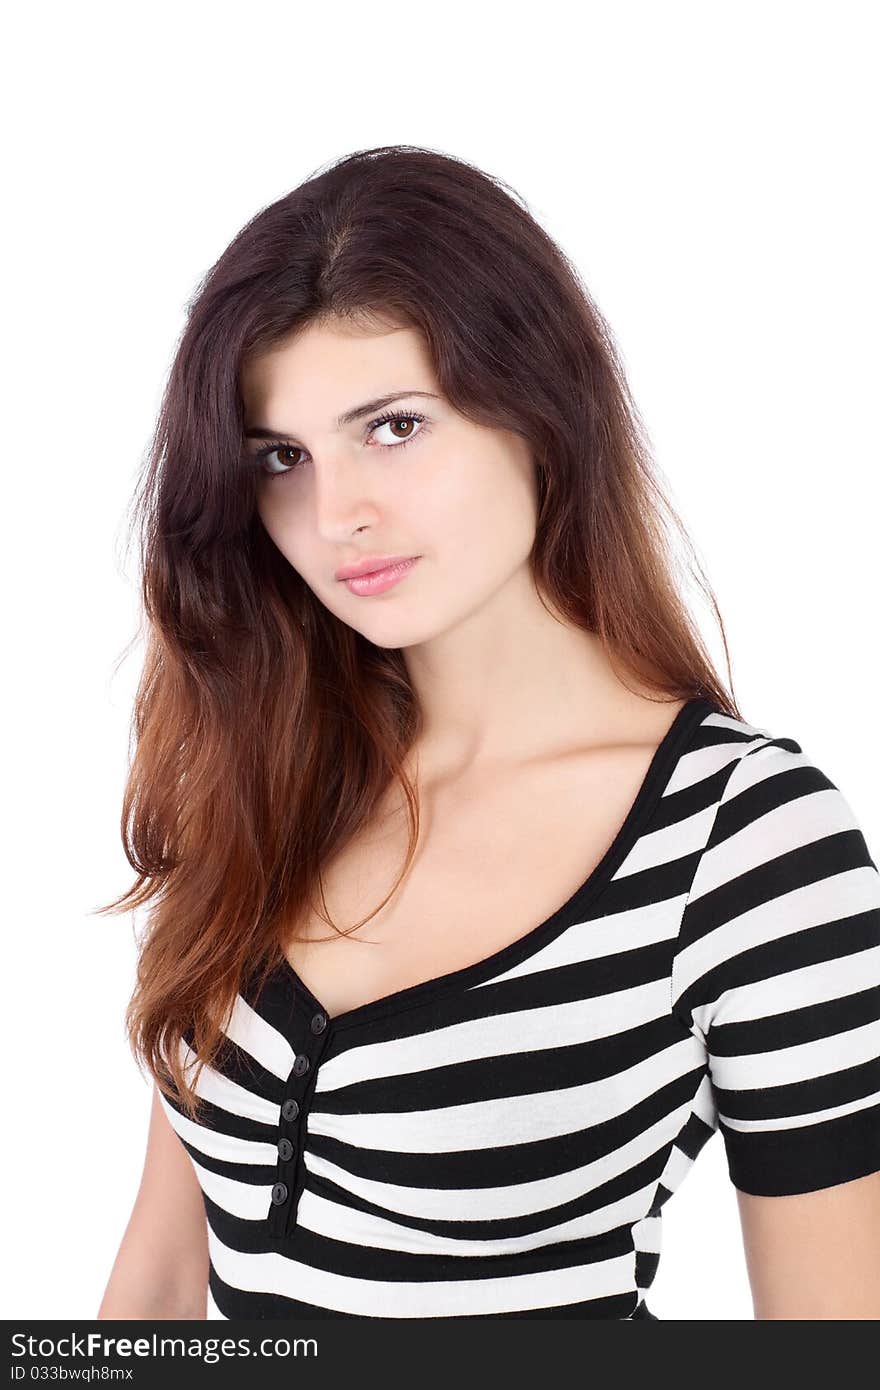 Beauty girl in t-shirt from material in white stripes on white background